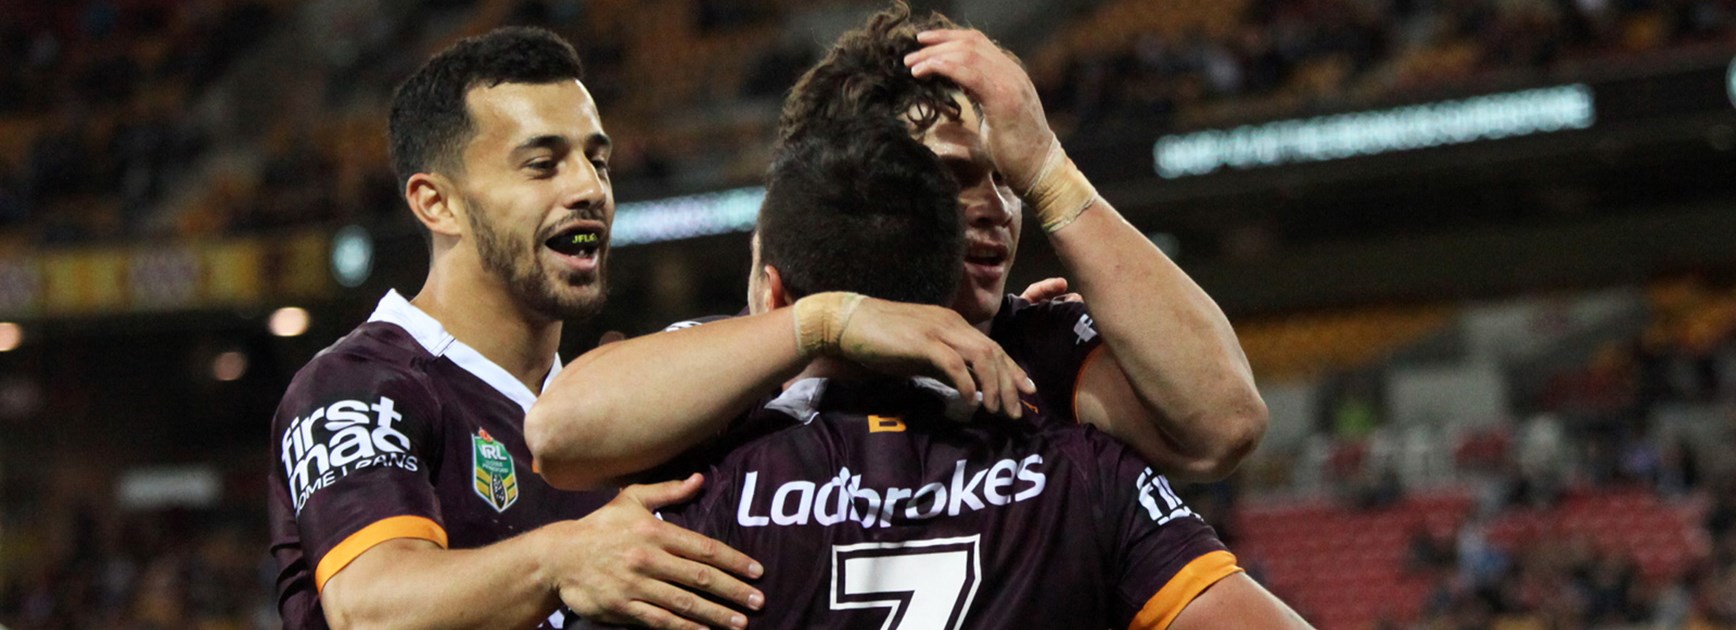 The Brisbane Broncos were on fire from the start of Thursday's clash with Penrith.